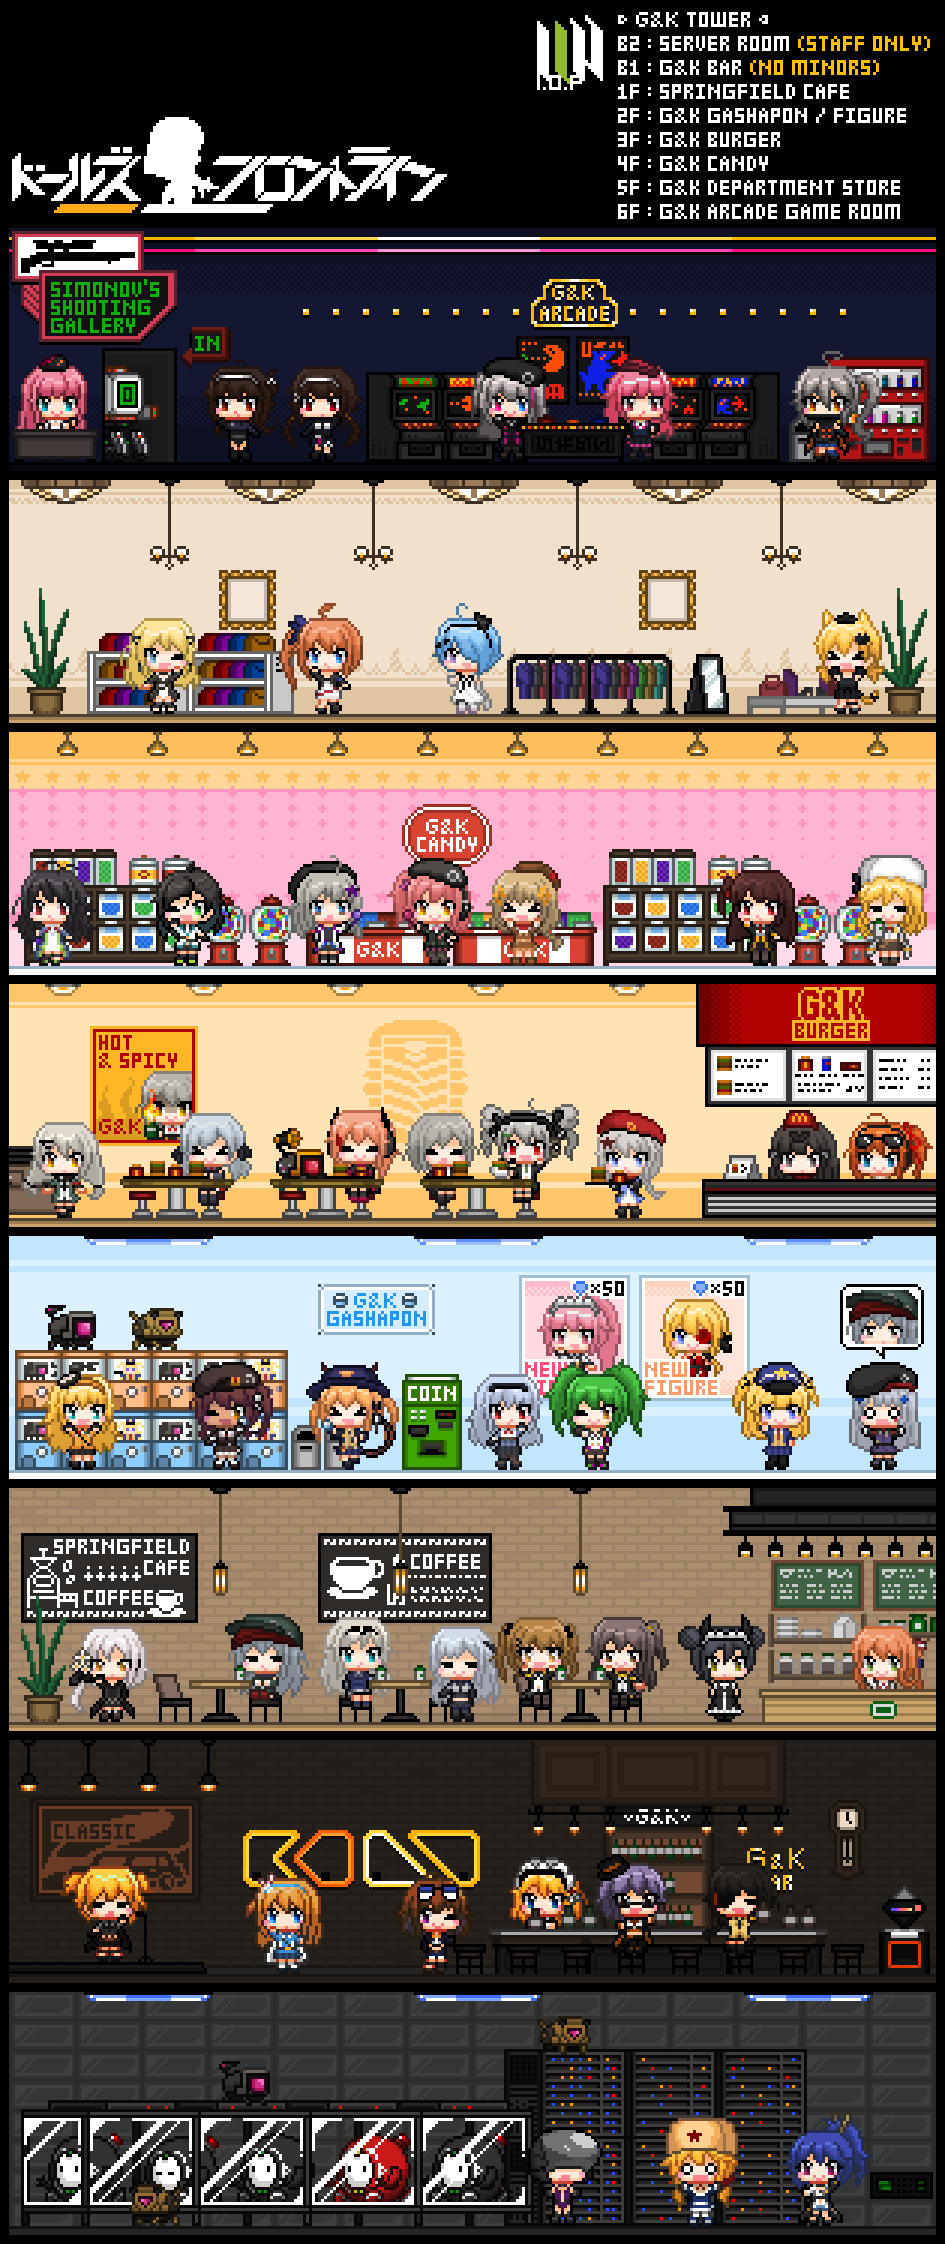 9a-91_(girls_frontline) agent_(girls_frontline) ak-12_(girls_frontline) an-94_(girls_frontline) arcade bar cafe candy_store character_request clothes dinergate_(girls_frontline) english fal_(girls_frontline) fast_food g11_(girls_frontline) gashapon girls_frontline grifon&amp;kryuger grizzly_mkv_(girls_frontline) highres hk416_(girls_frontline) k5_(girls_frontline) kalina_(girls_frontline) m16a1_(girls_frontline) menu_board mg4_(girls_frontline) multiple_girls music ootsuka_shin'ichirou ootsuka_shin'ichirou pixel_art pkp_(girls_frontline) pp-90_(girls_frontline) restaurant s.a.t.8_(girls_frontline) sangvis_ferri shop singing steyr_aug_(girls_frontline) super_shorty_(girls_frontline) tarantula_(girls_frontline) ump45_(girls_frontline) ump9_(girls_frontline) welrod_mk2_(girls_frontline) yuyukong